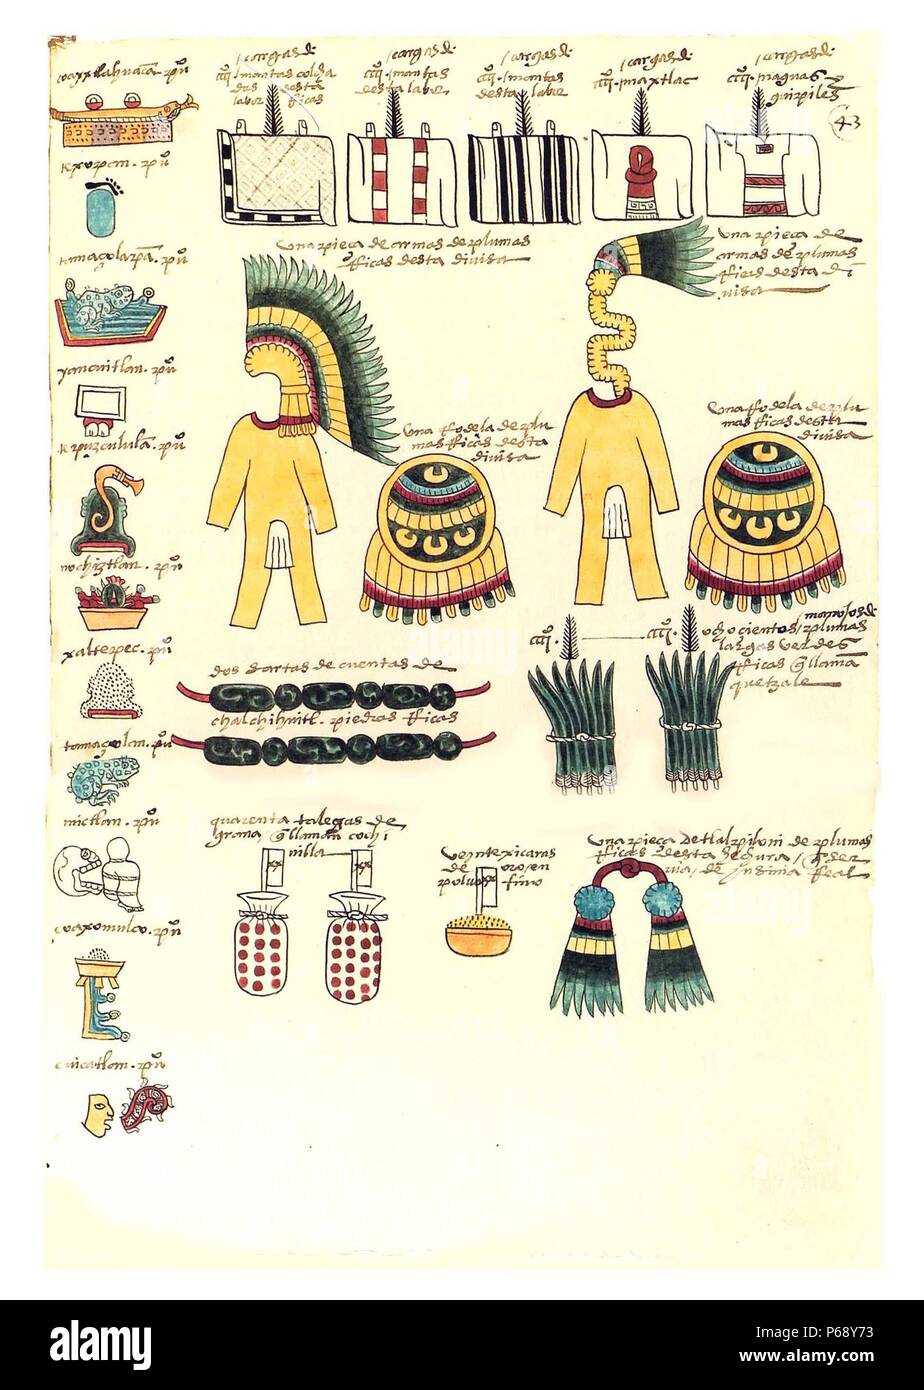 Folio from the Codex Mendoza. The Codex Mendoza is an Aztec codex, created about twenty years after the Spanish conquest of Mexico with the intent that it be seen by Charles V, the Holy Roman Emperor and King of Spain. It contains a history of the Aztec rulers and their conquests, a list of the tribute paid by the conquered, and a description of daily Aztec life, in traditional Aztec pictograms with Spanish explanations and commentary. Dated 16th Century Stock Photo